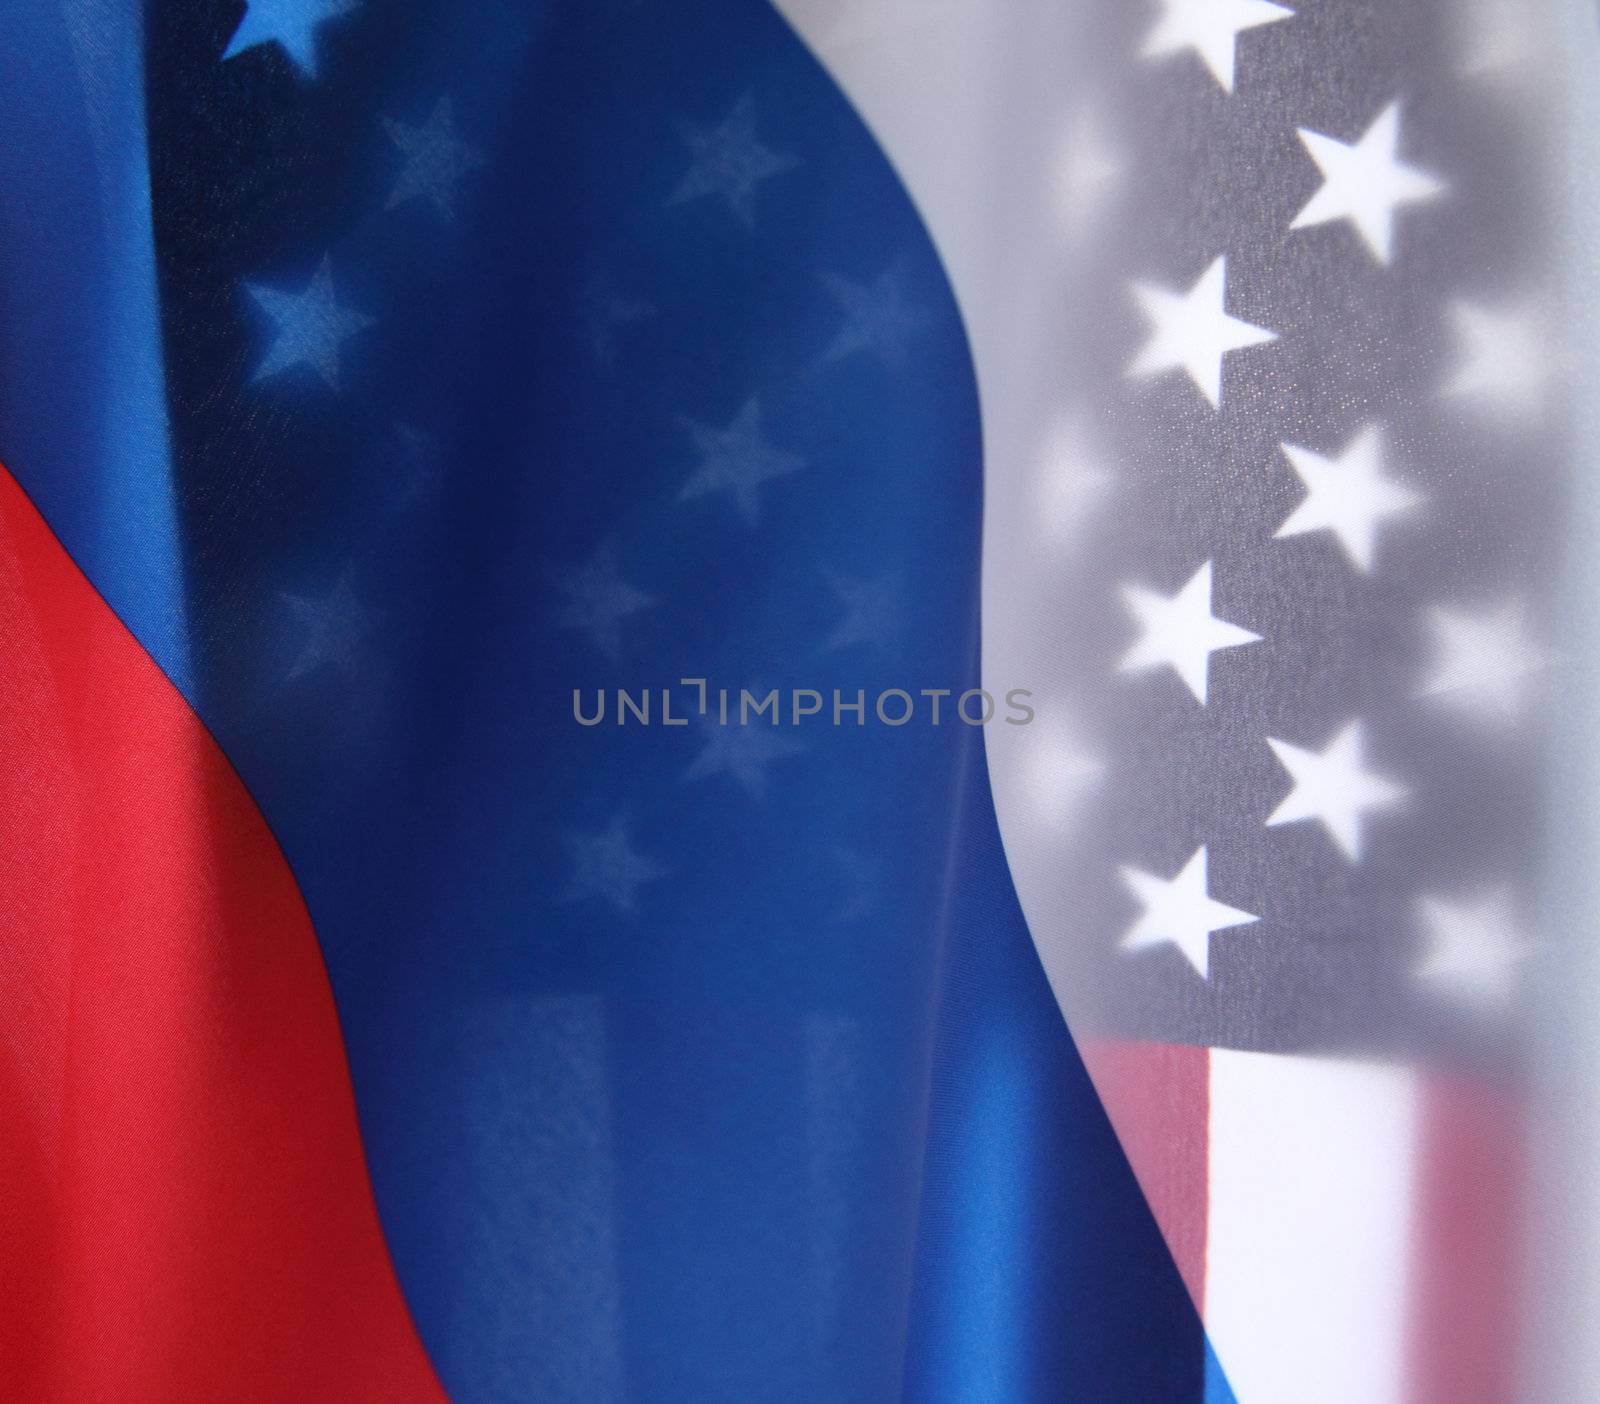 USA and Russia flags by nebari